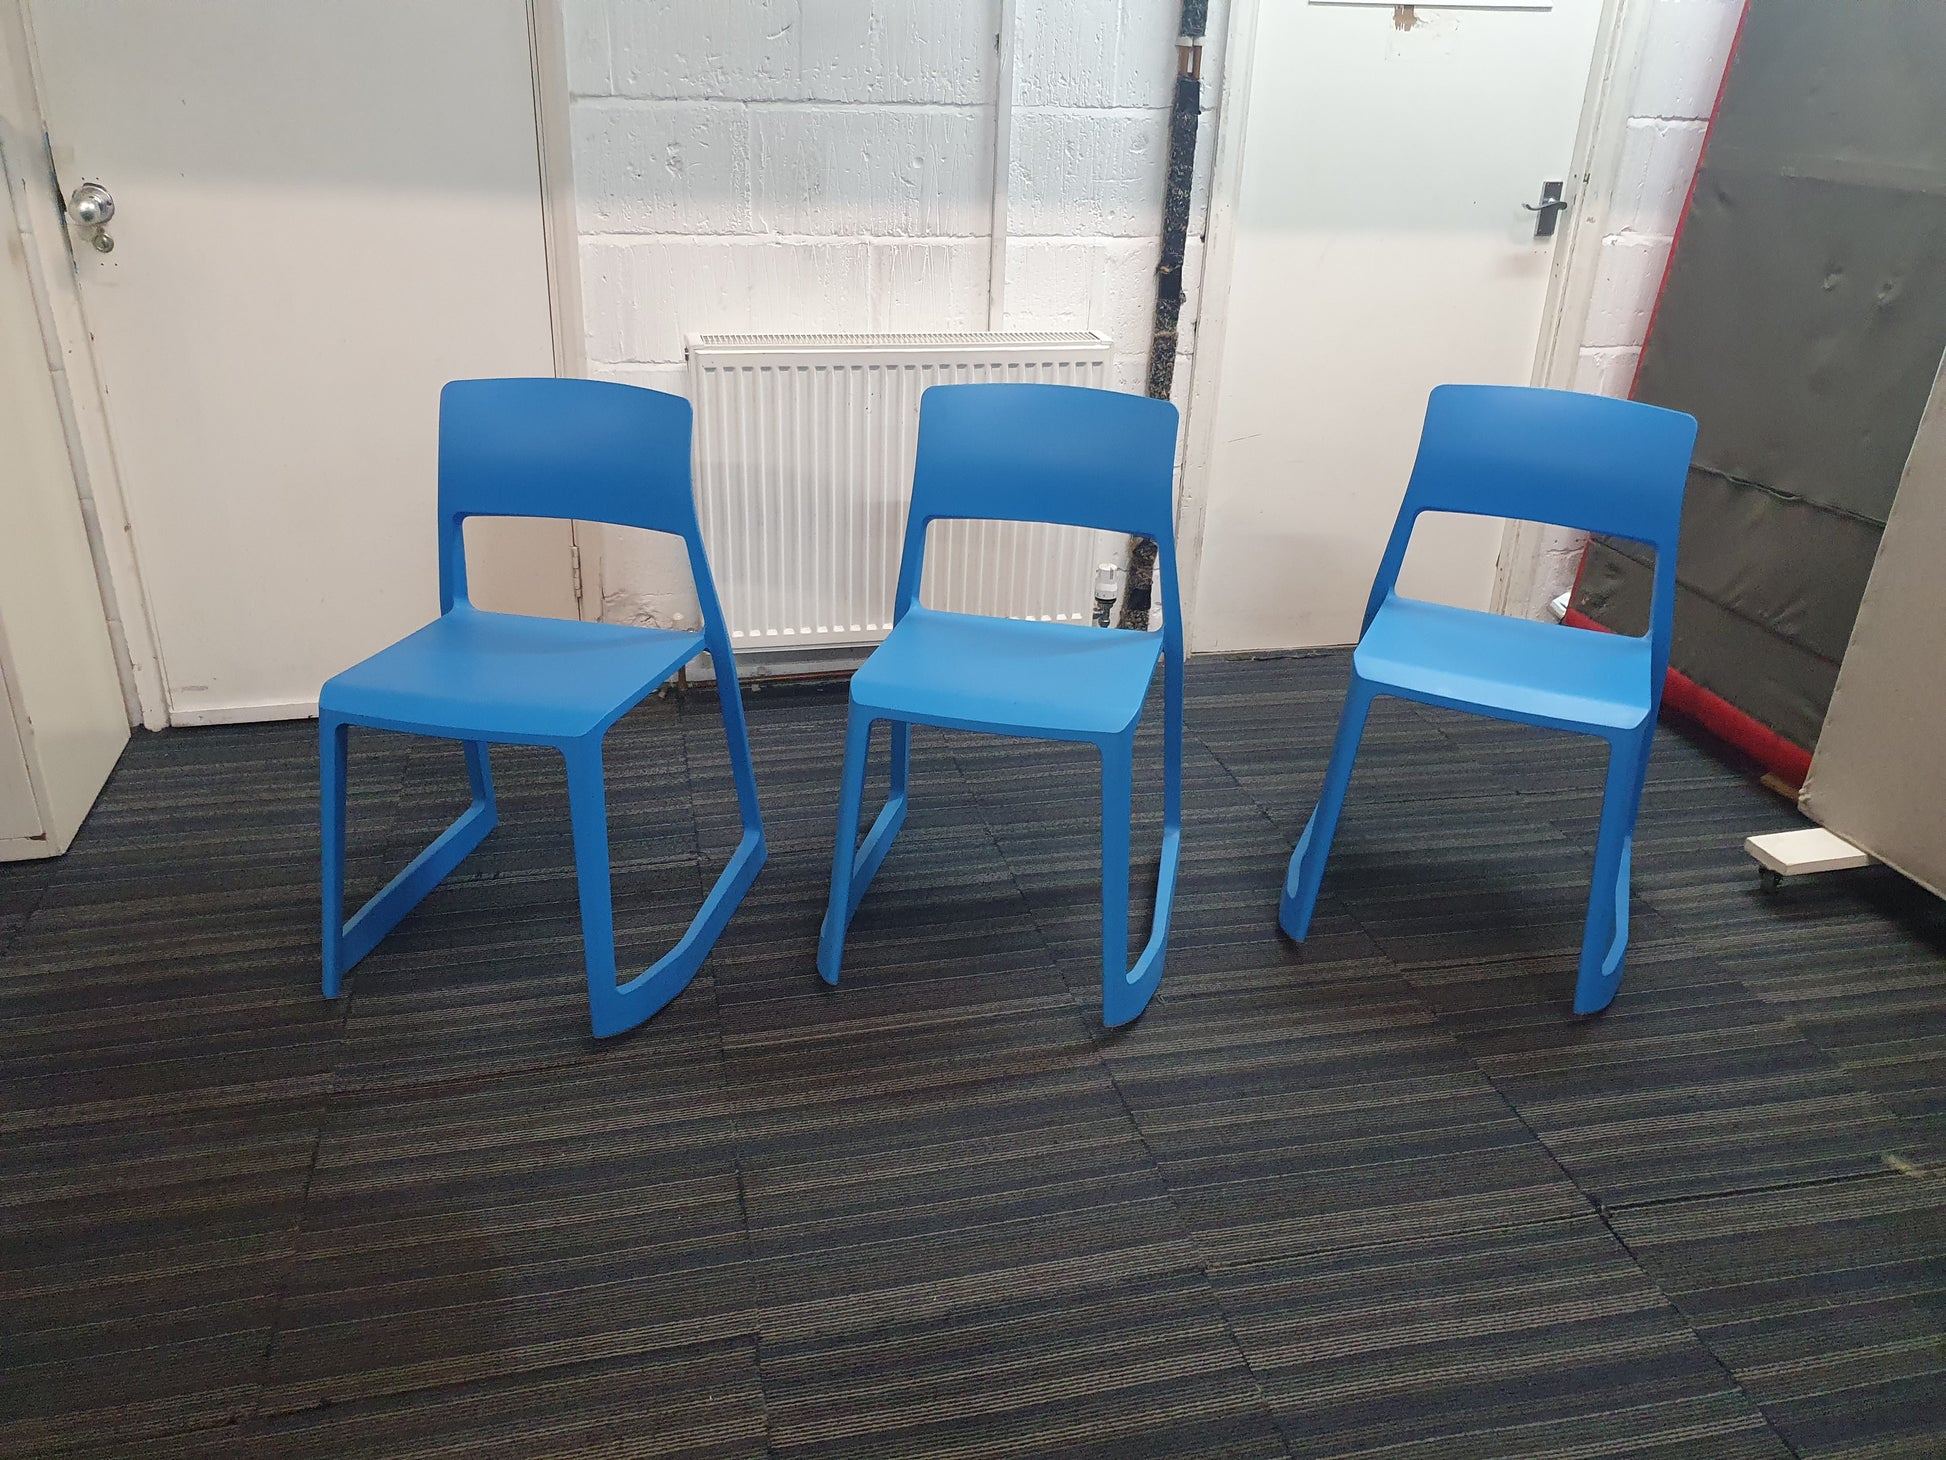 Three azure blue canteen chairs on carpet